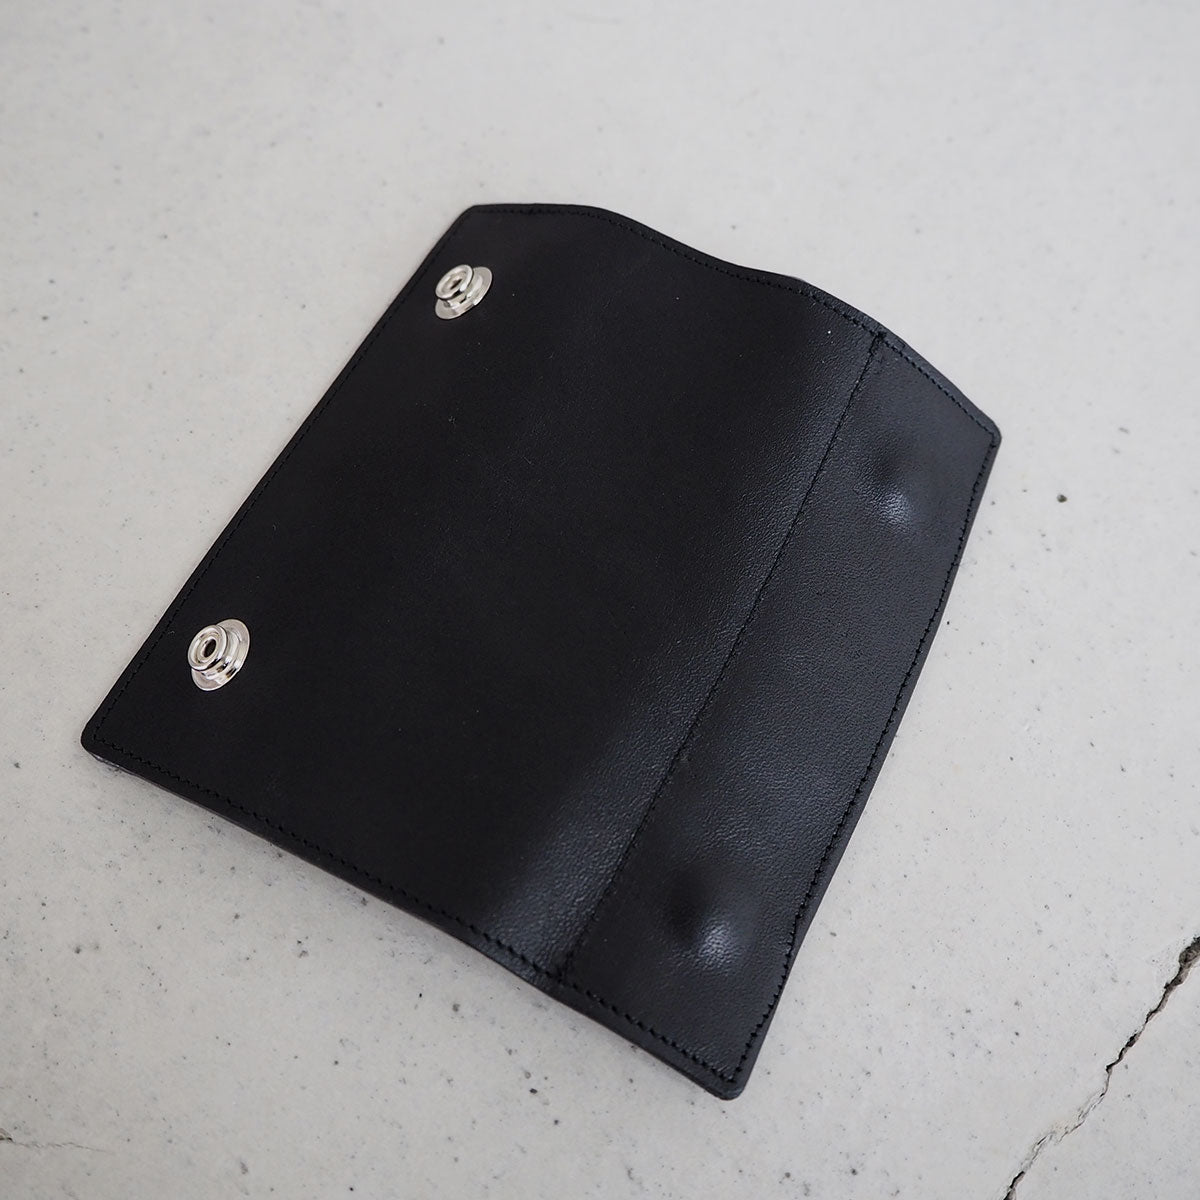 Leather handle cover